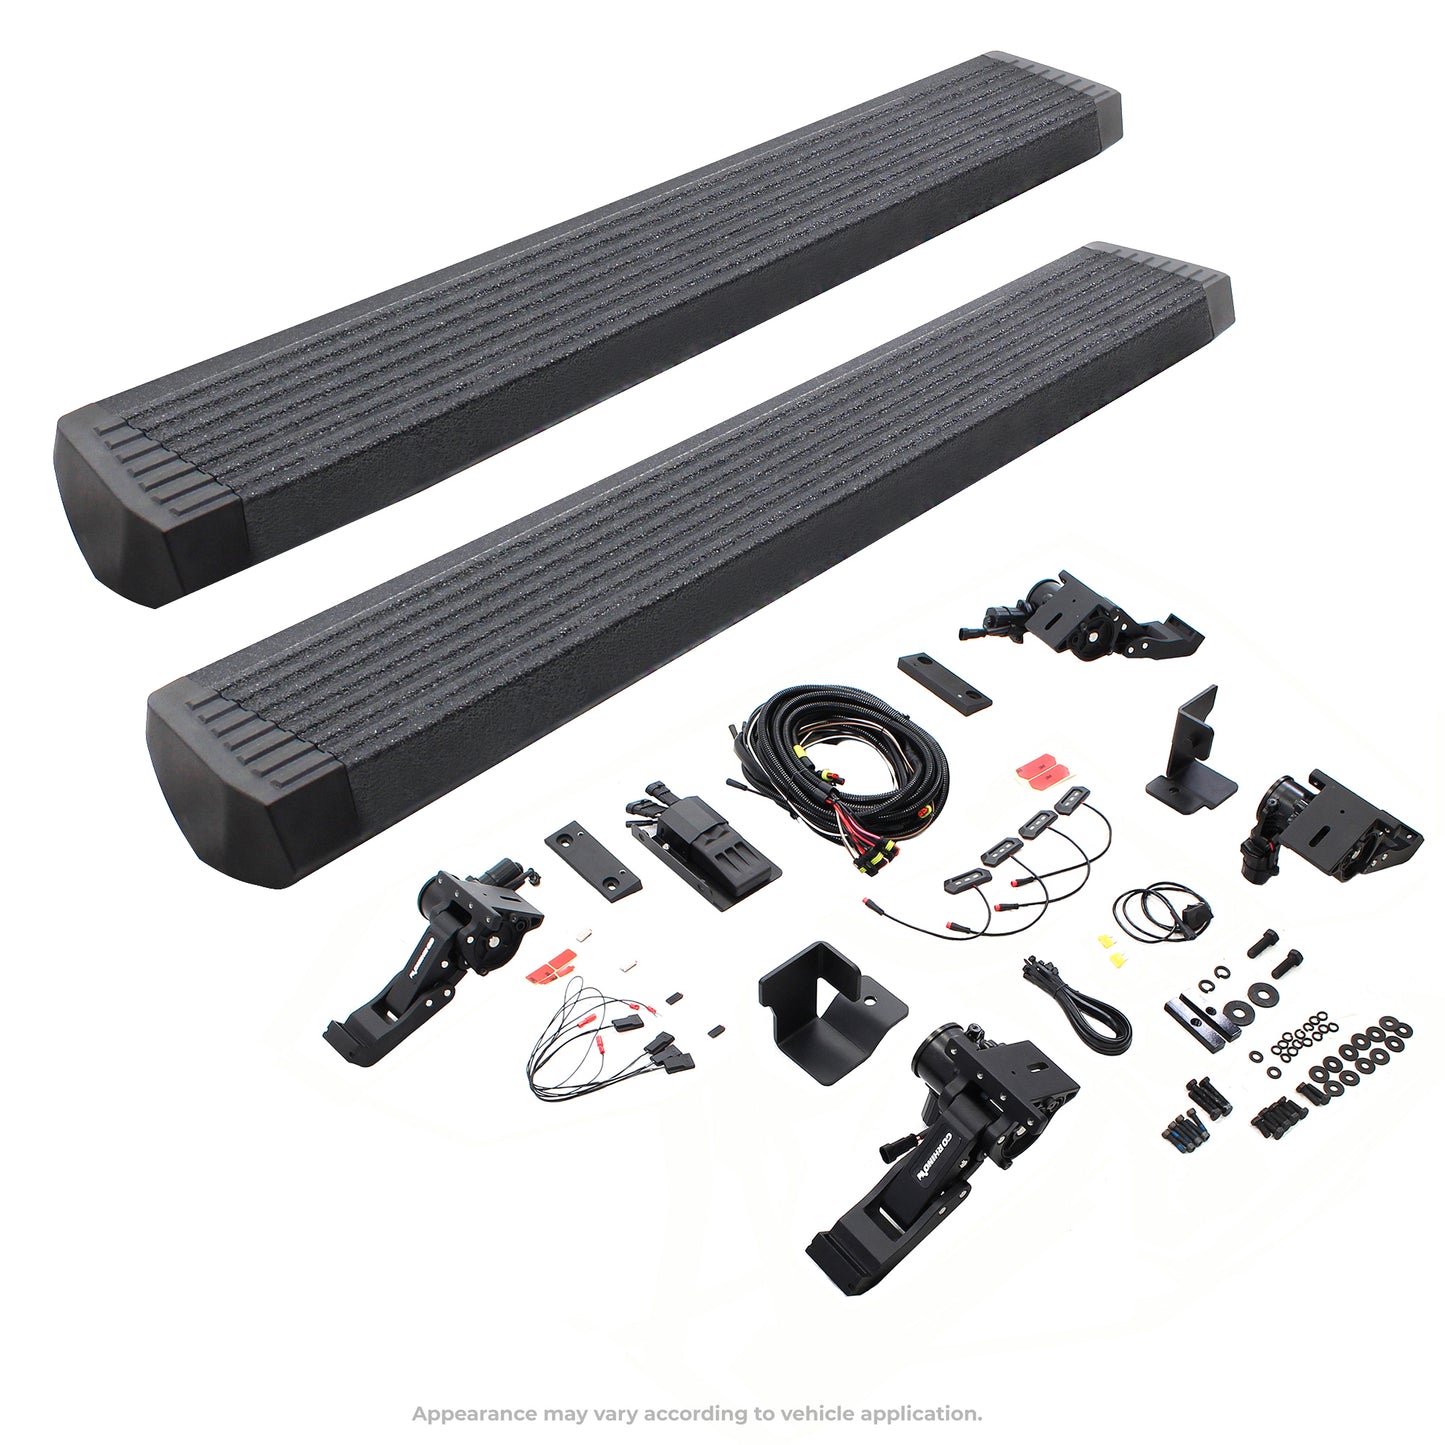 Go Rhino 20450674T E1 Electric Running Boards With Mounting Brackets Protective Bedliner Coating